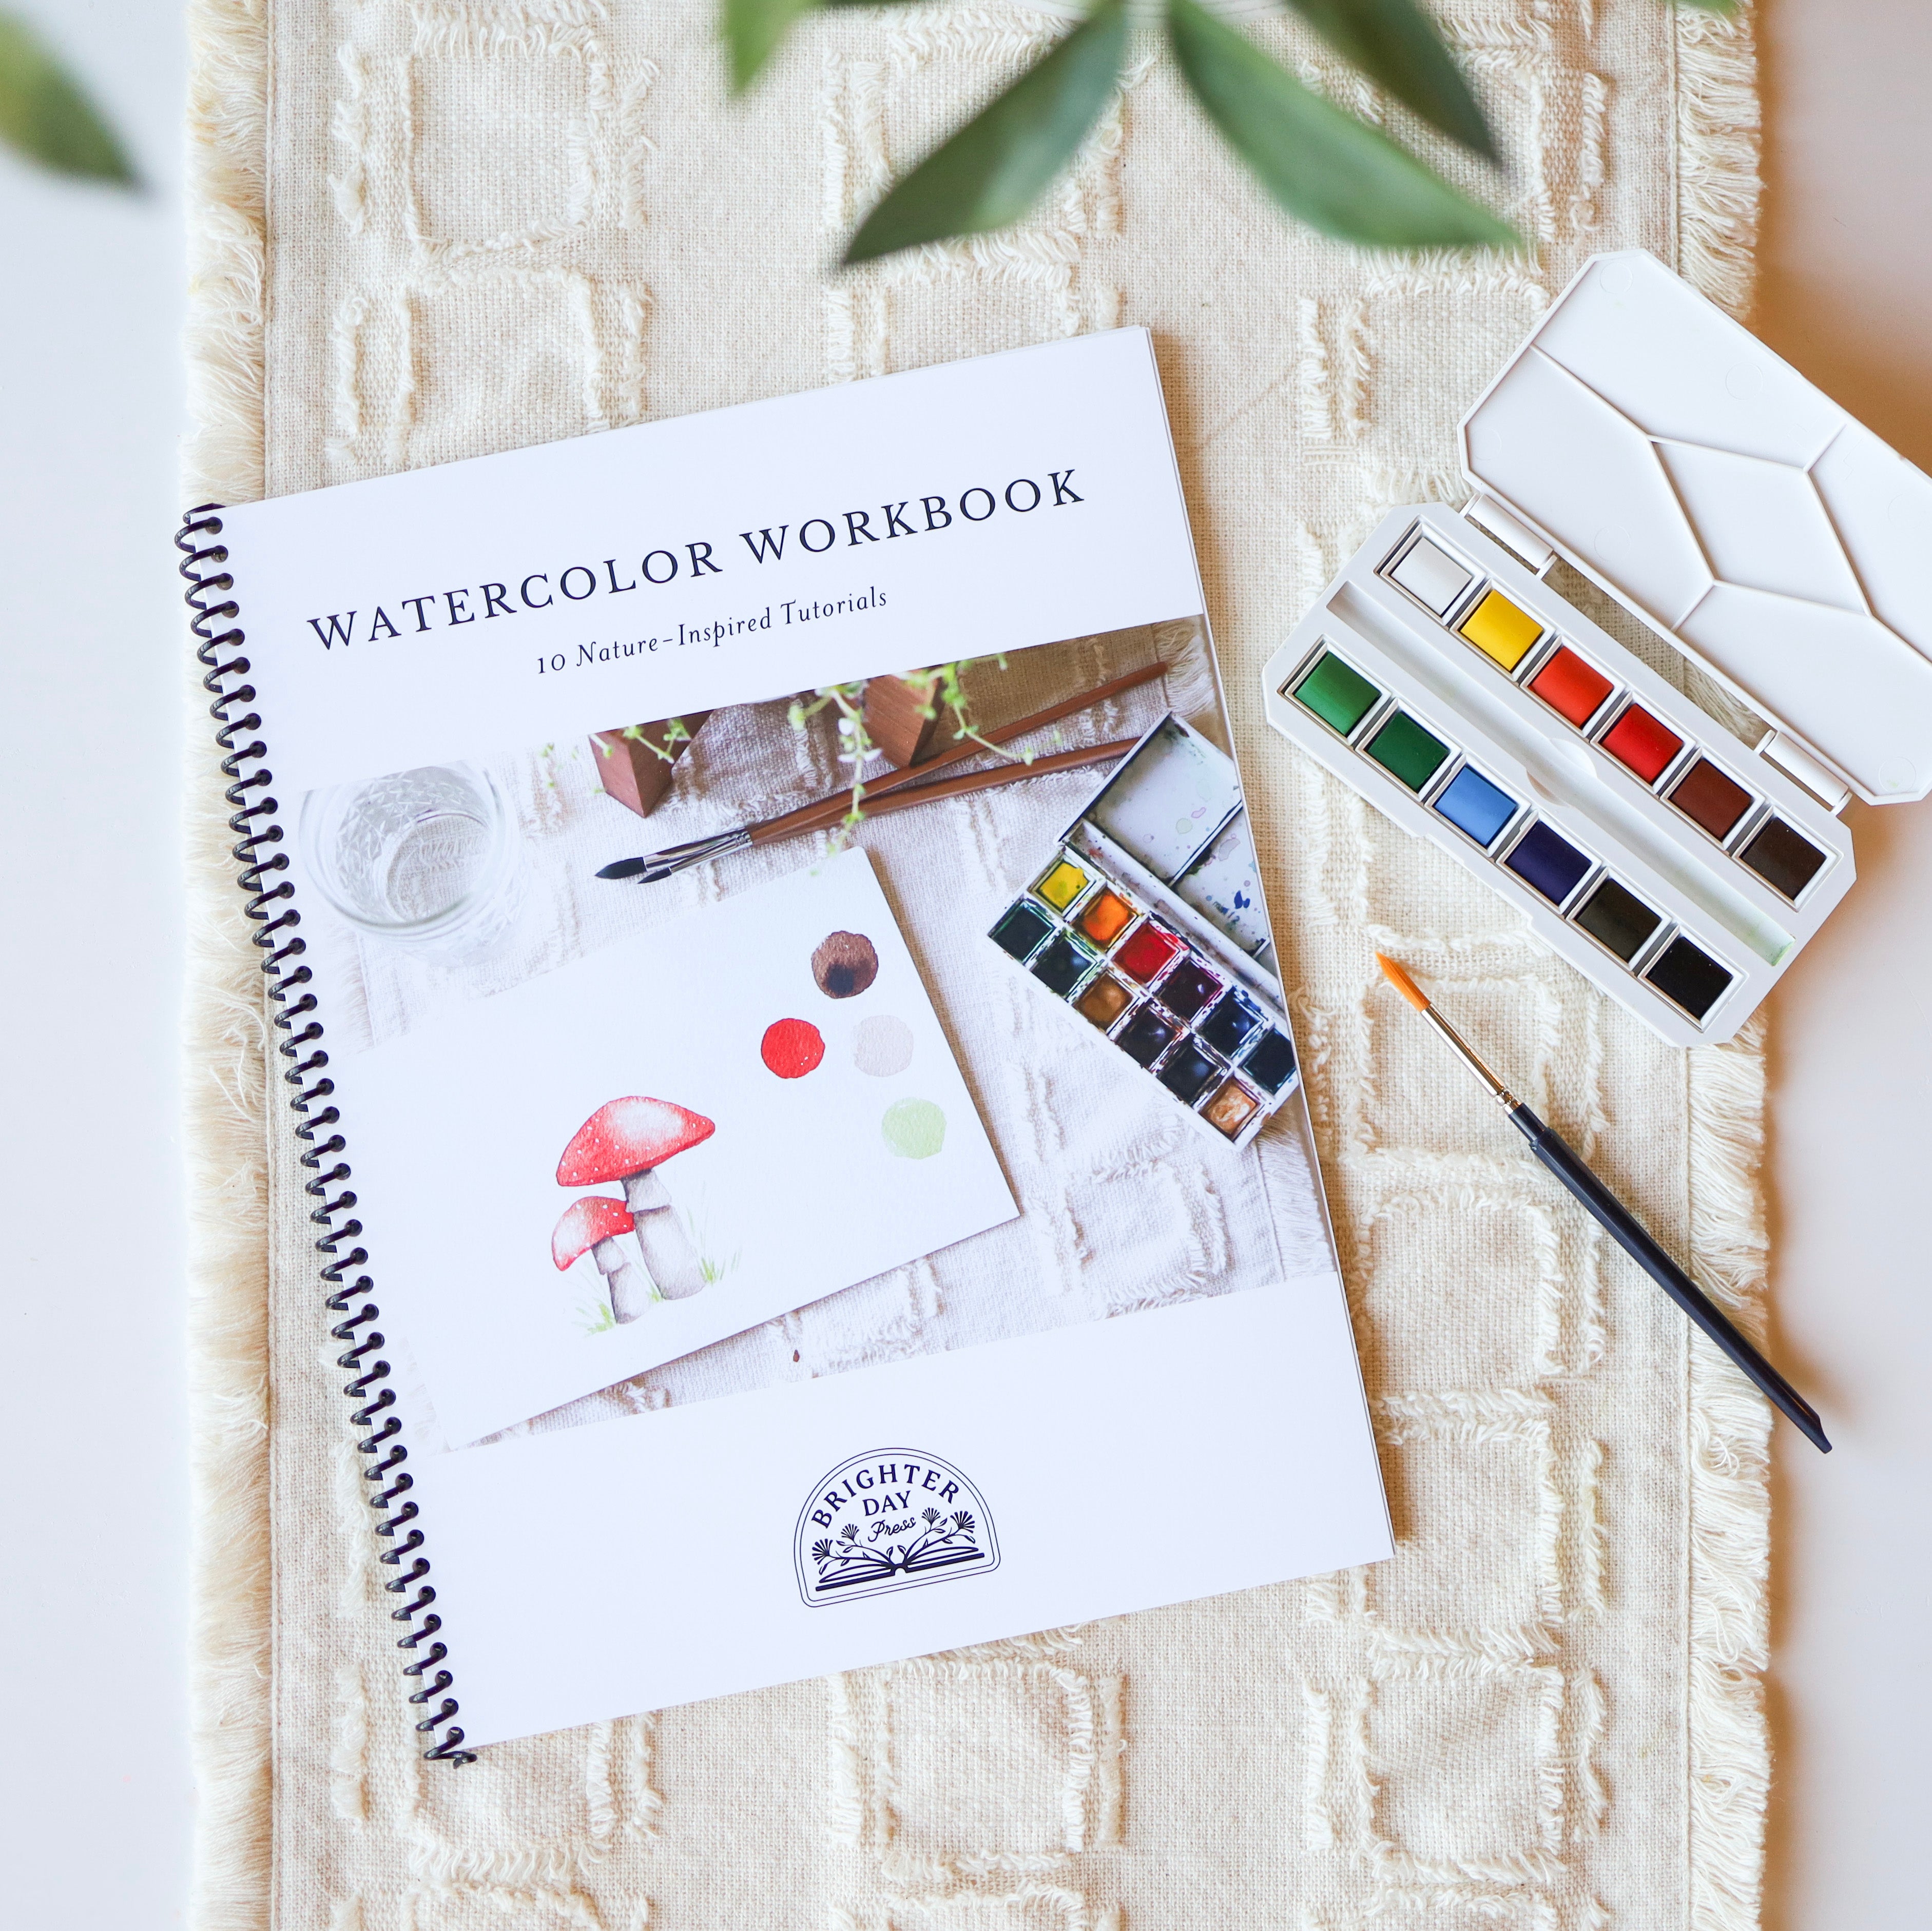 Watercolor Workbook: Nature – Brighter Day Press